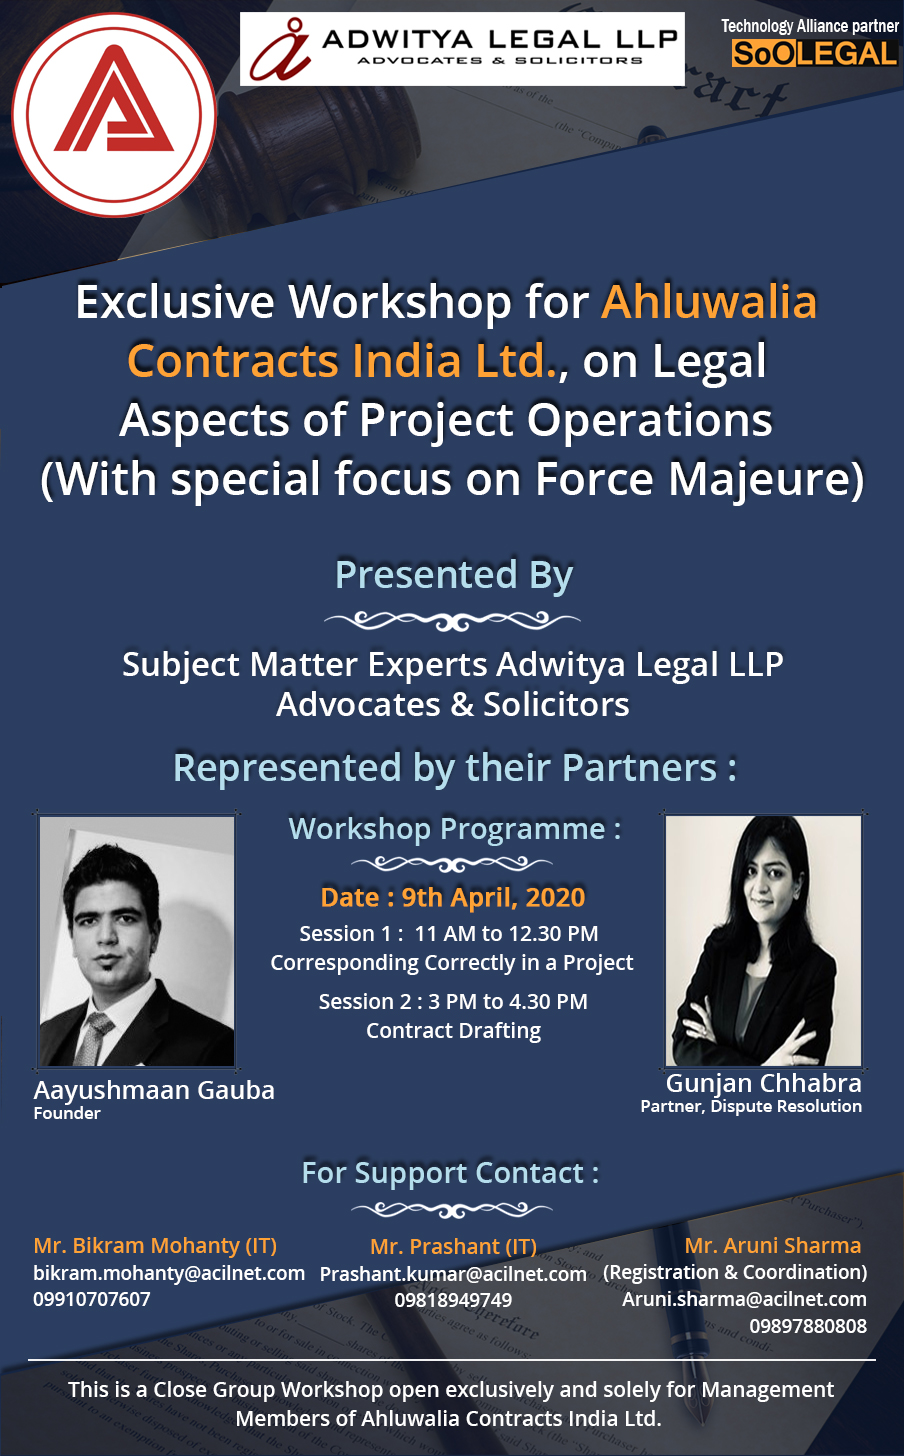 Exclusive Workshop for Ahluwalia Contracts India Ltd., on Legal Aspects of Project Operations (With special focus on Force Majeure)